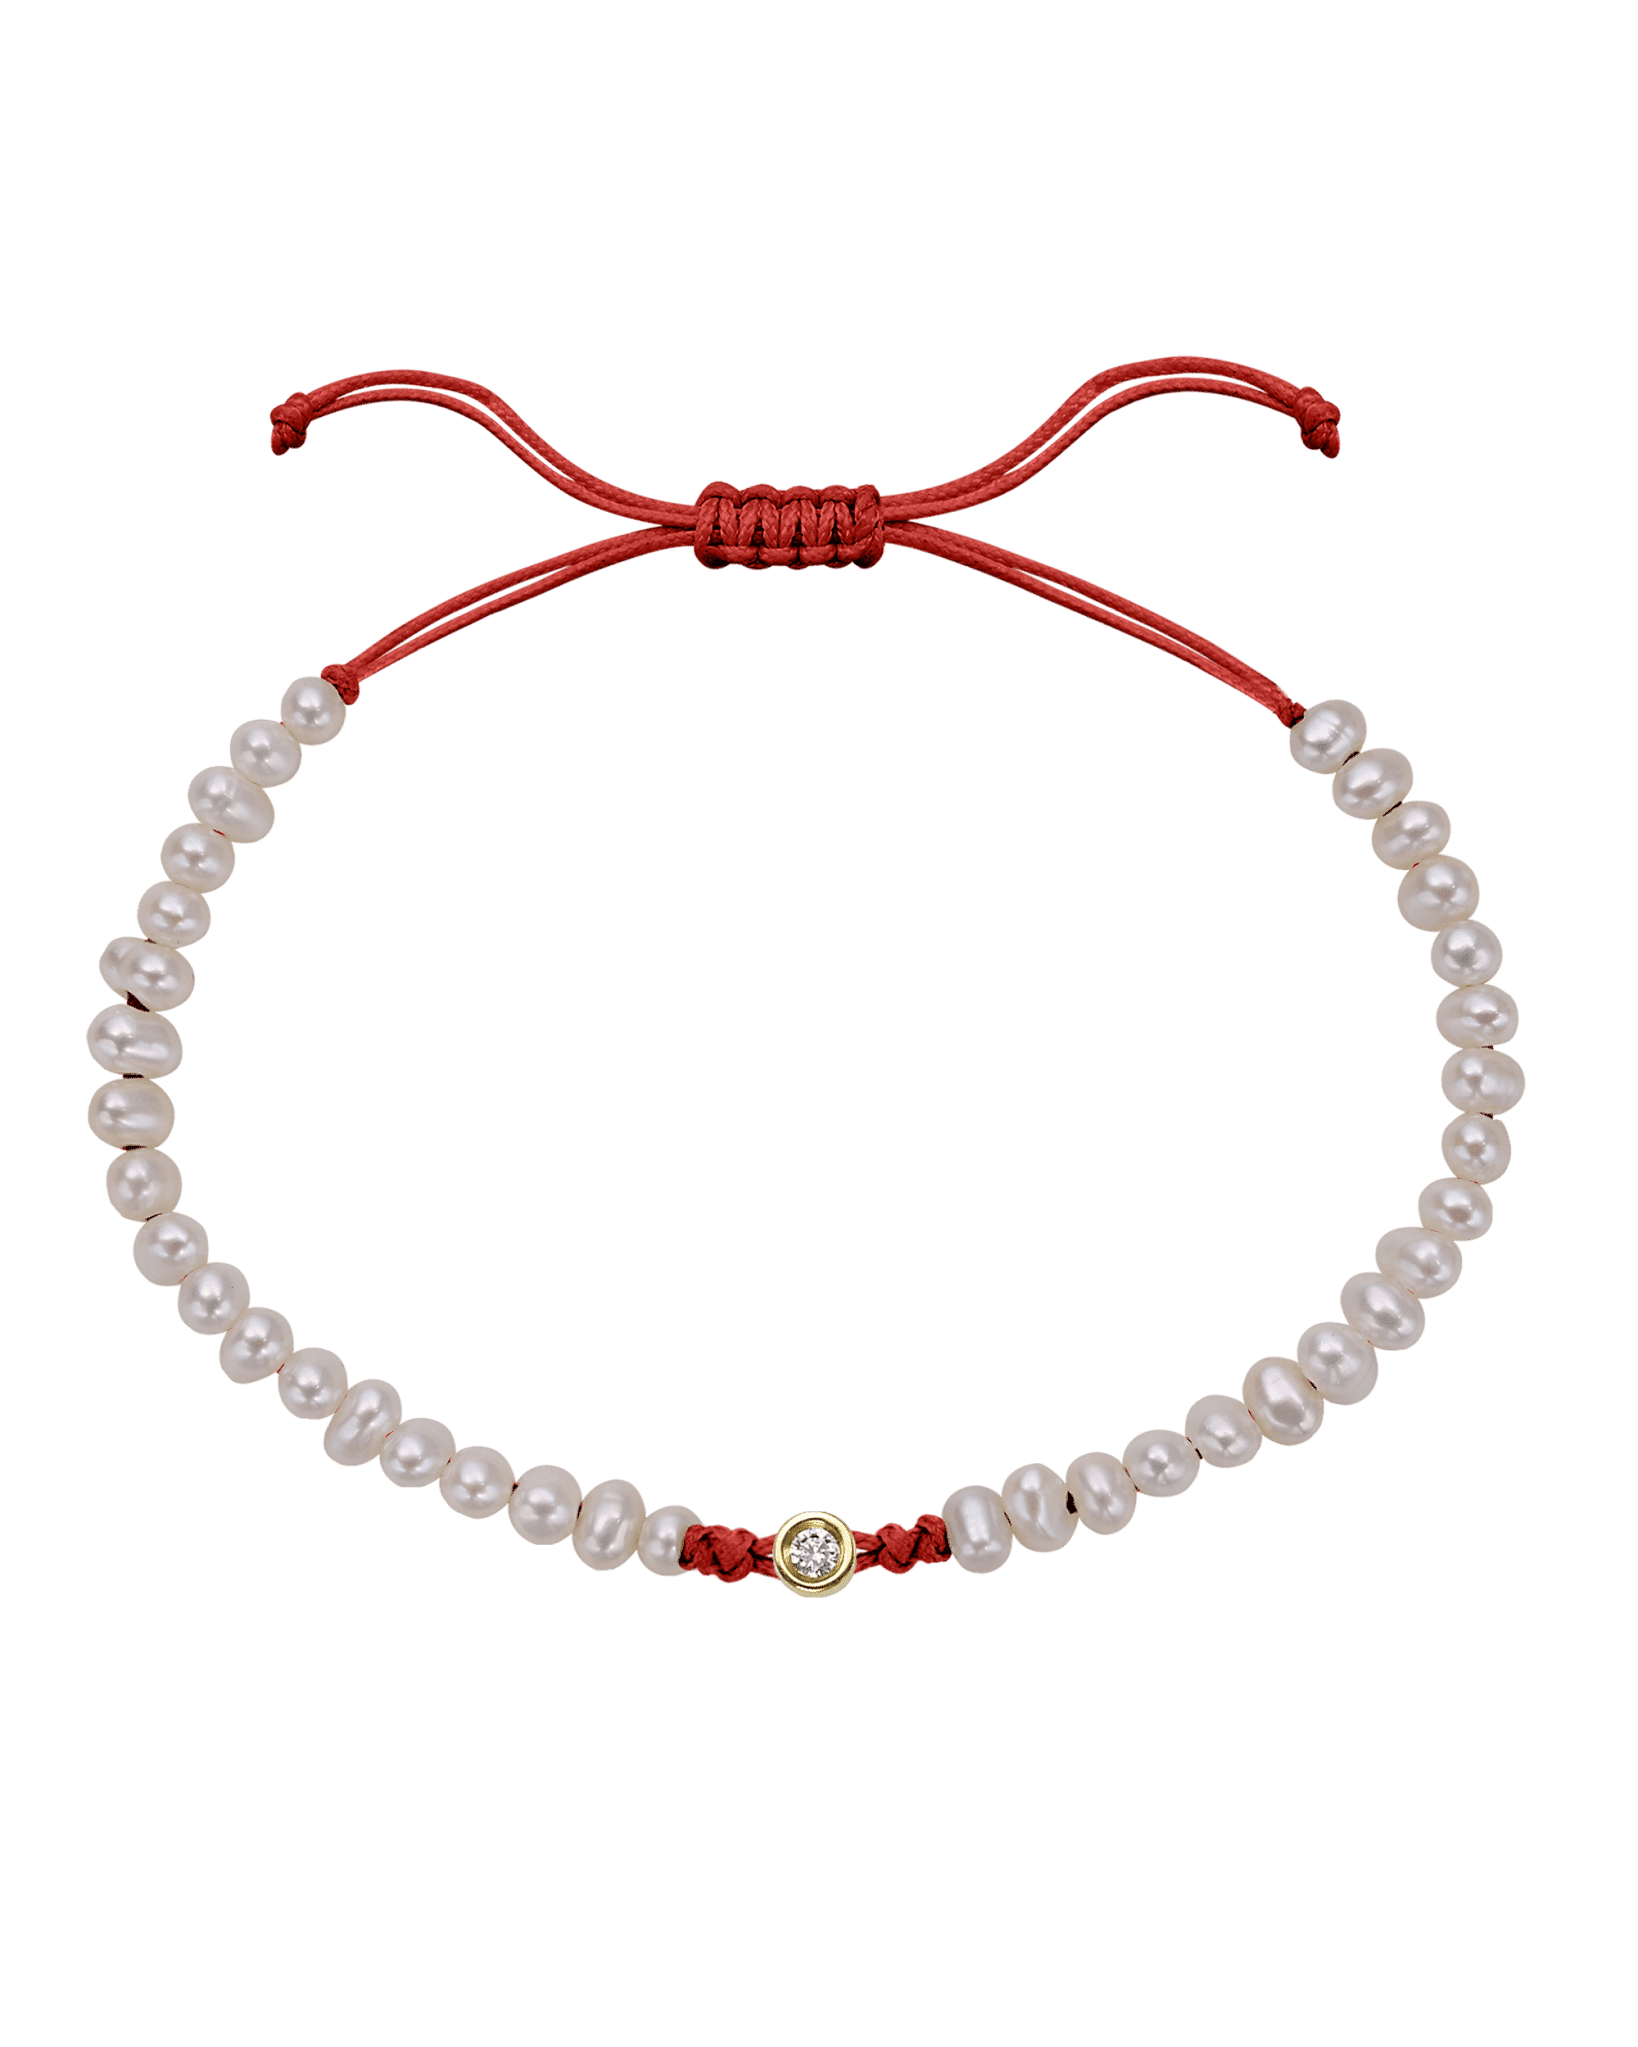 Le String of Love Perles Naturelles - Or Jaune 14 carats Bracelets magal-dev Rouge Small: 0.03 carats 